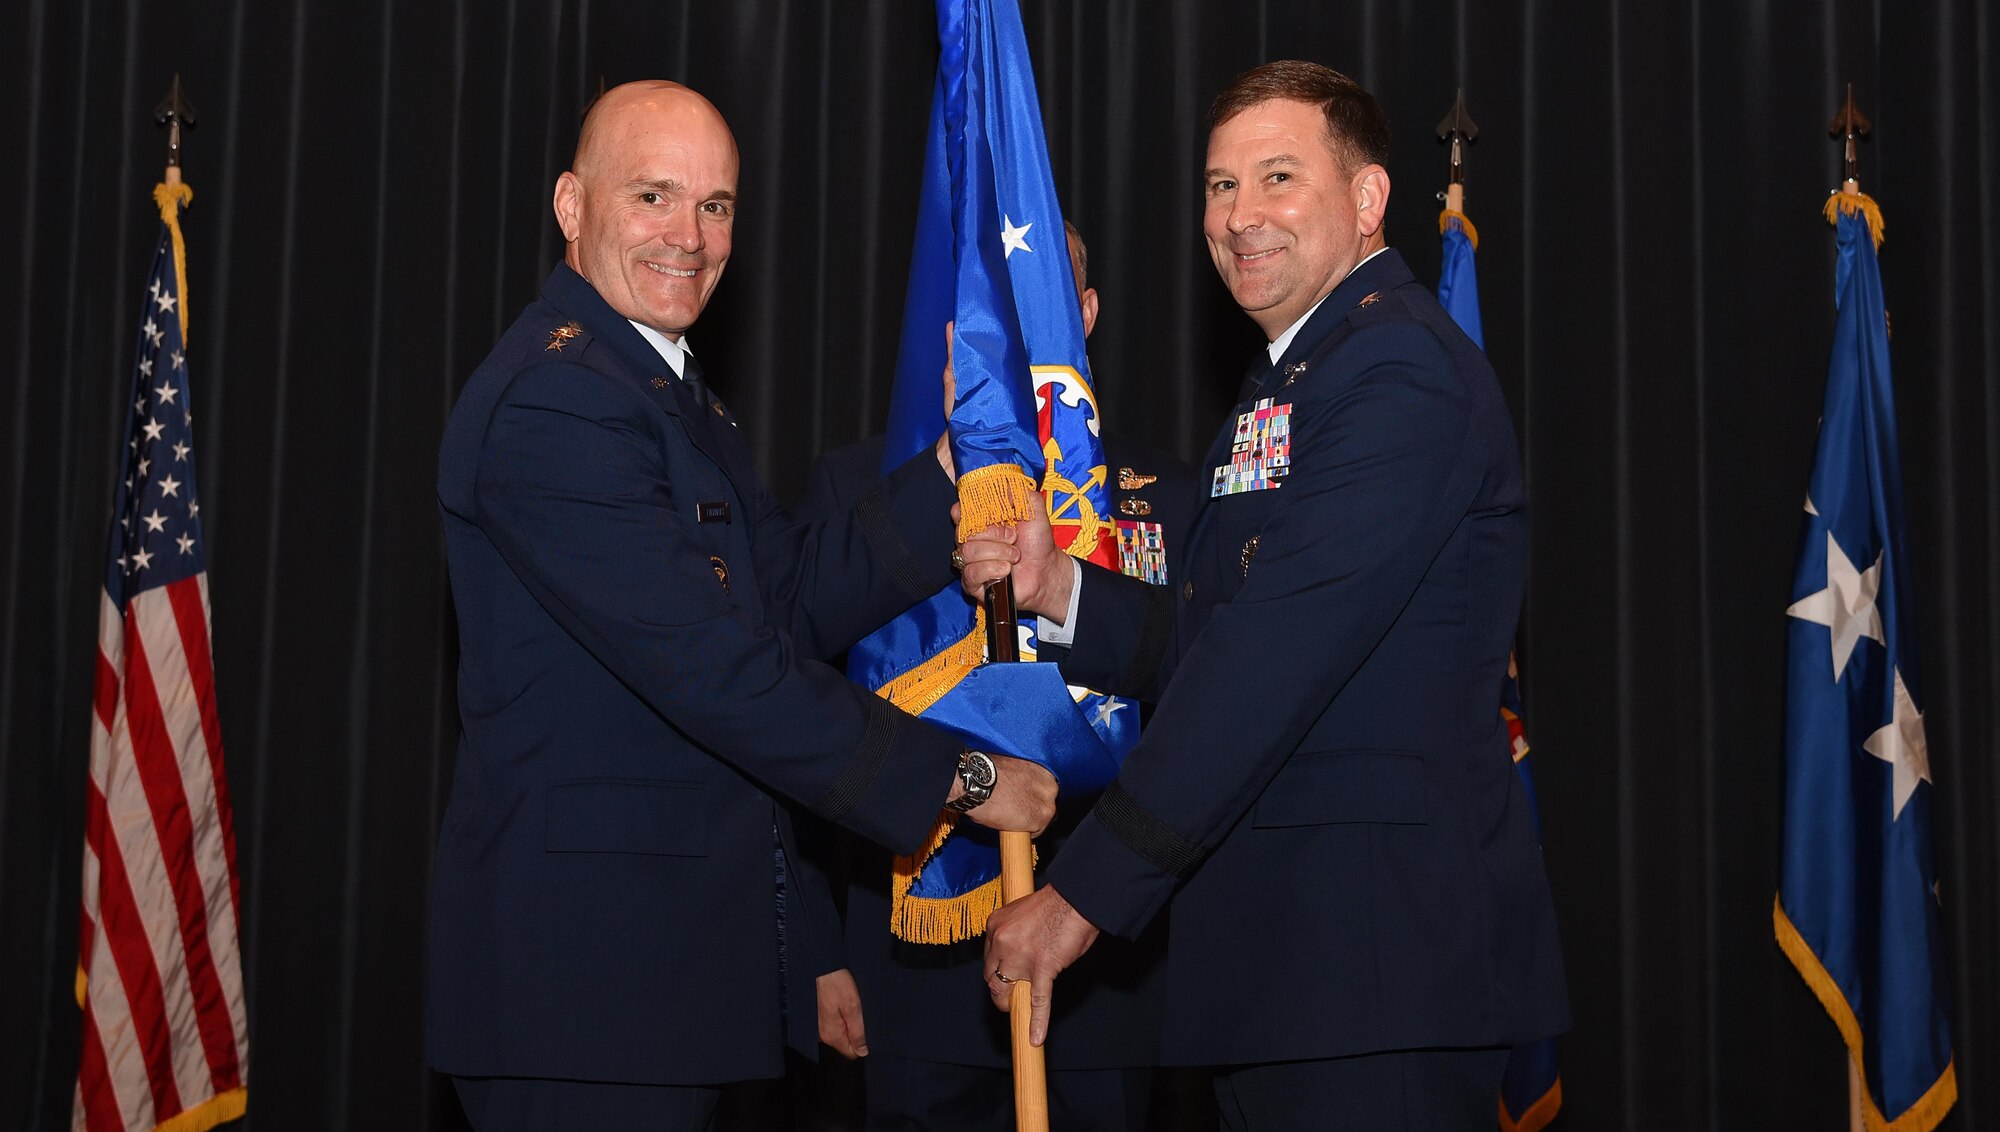 Maj. Gen. Christopher Bence (right) takes command of the U.S. Air Force Expeditionary Center in a ceremony at Joint Base McGuire-Dix-Lakehurst, New Jersey, Aug. 2. Air Mobility Command commander Gen. Carlton Everhart (left) presided over the ceremony, and Maj. Gen. Frederick Martin relinquished command after leading the center for three years. (U.S. Air Force photo by Tech. Sgt. Jaimie Powell)